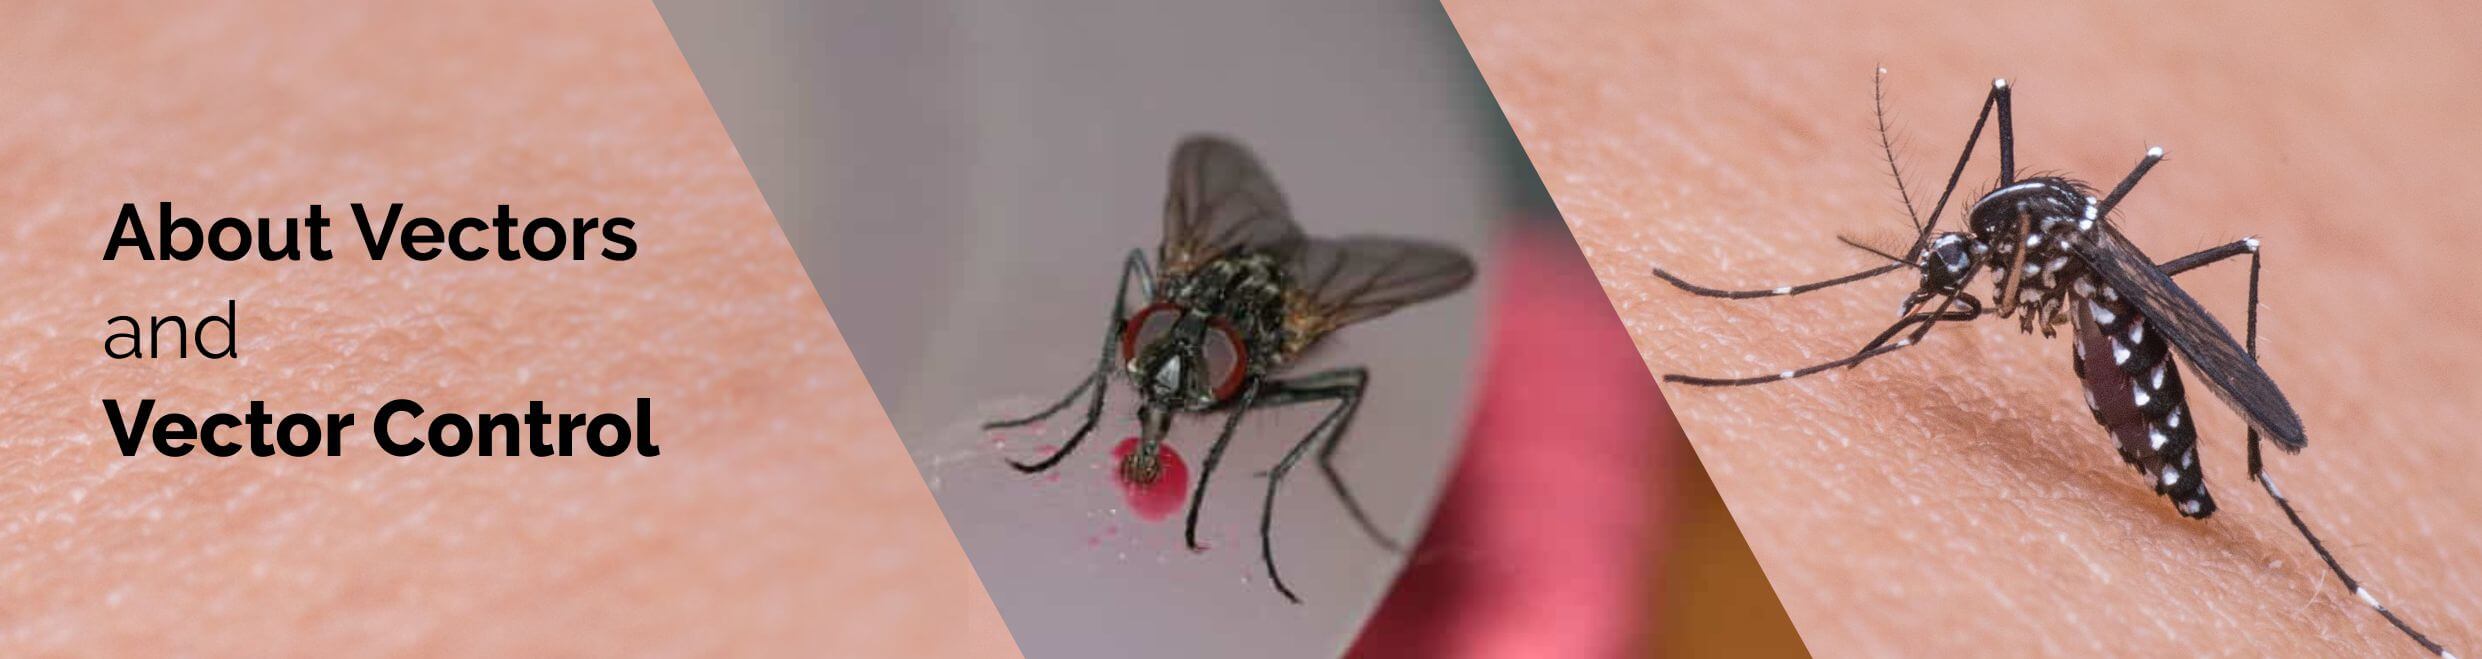 About Vectors and Vector Control service in Indore, MP, India